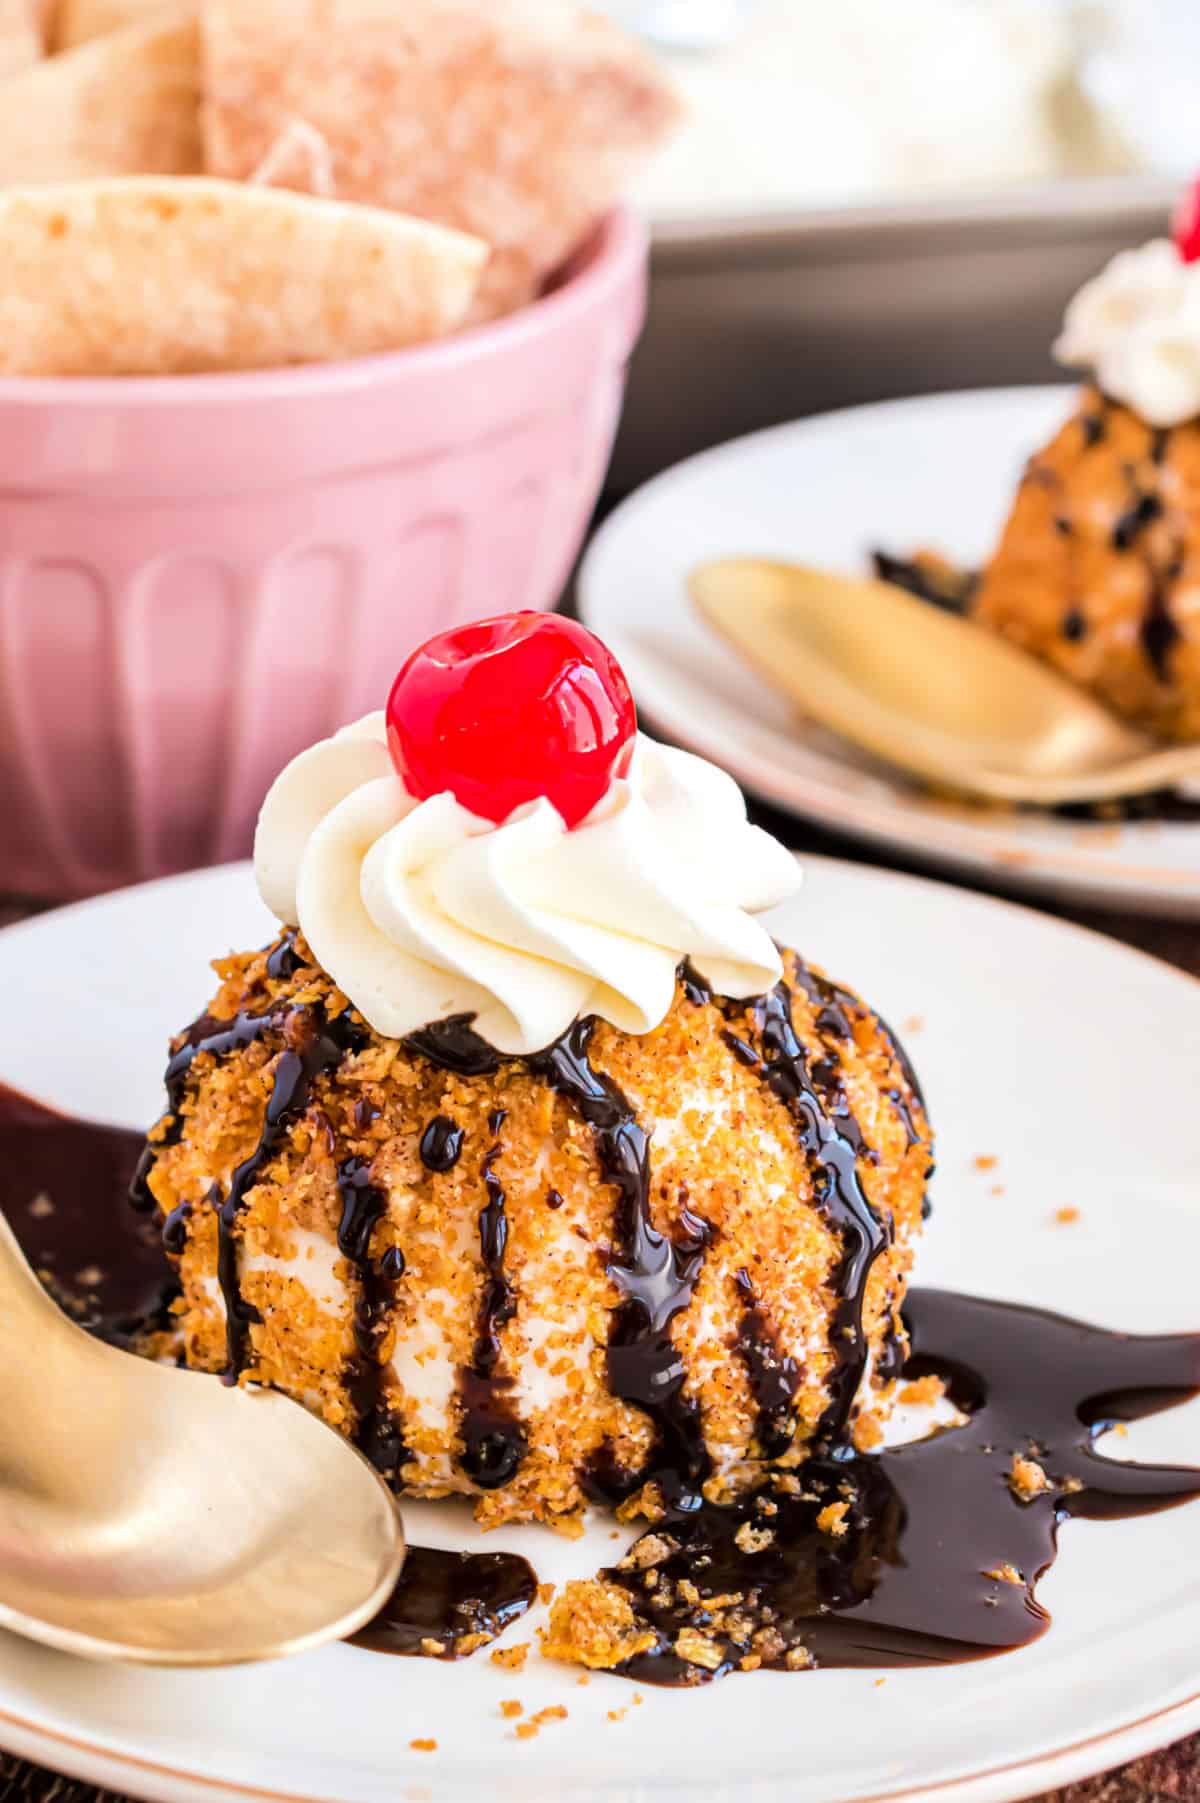 Fried ice cream on a white plate with chocolate syrup, whipped cream, and a cherry.